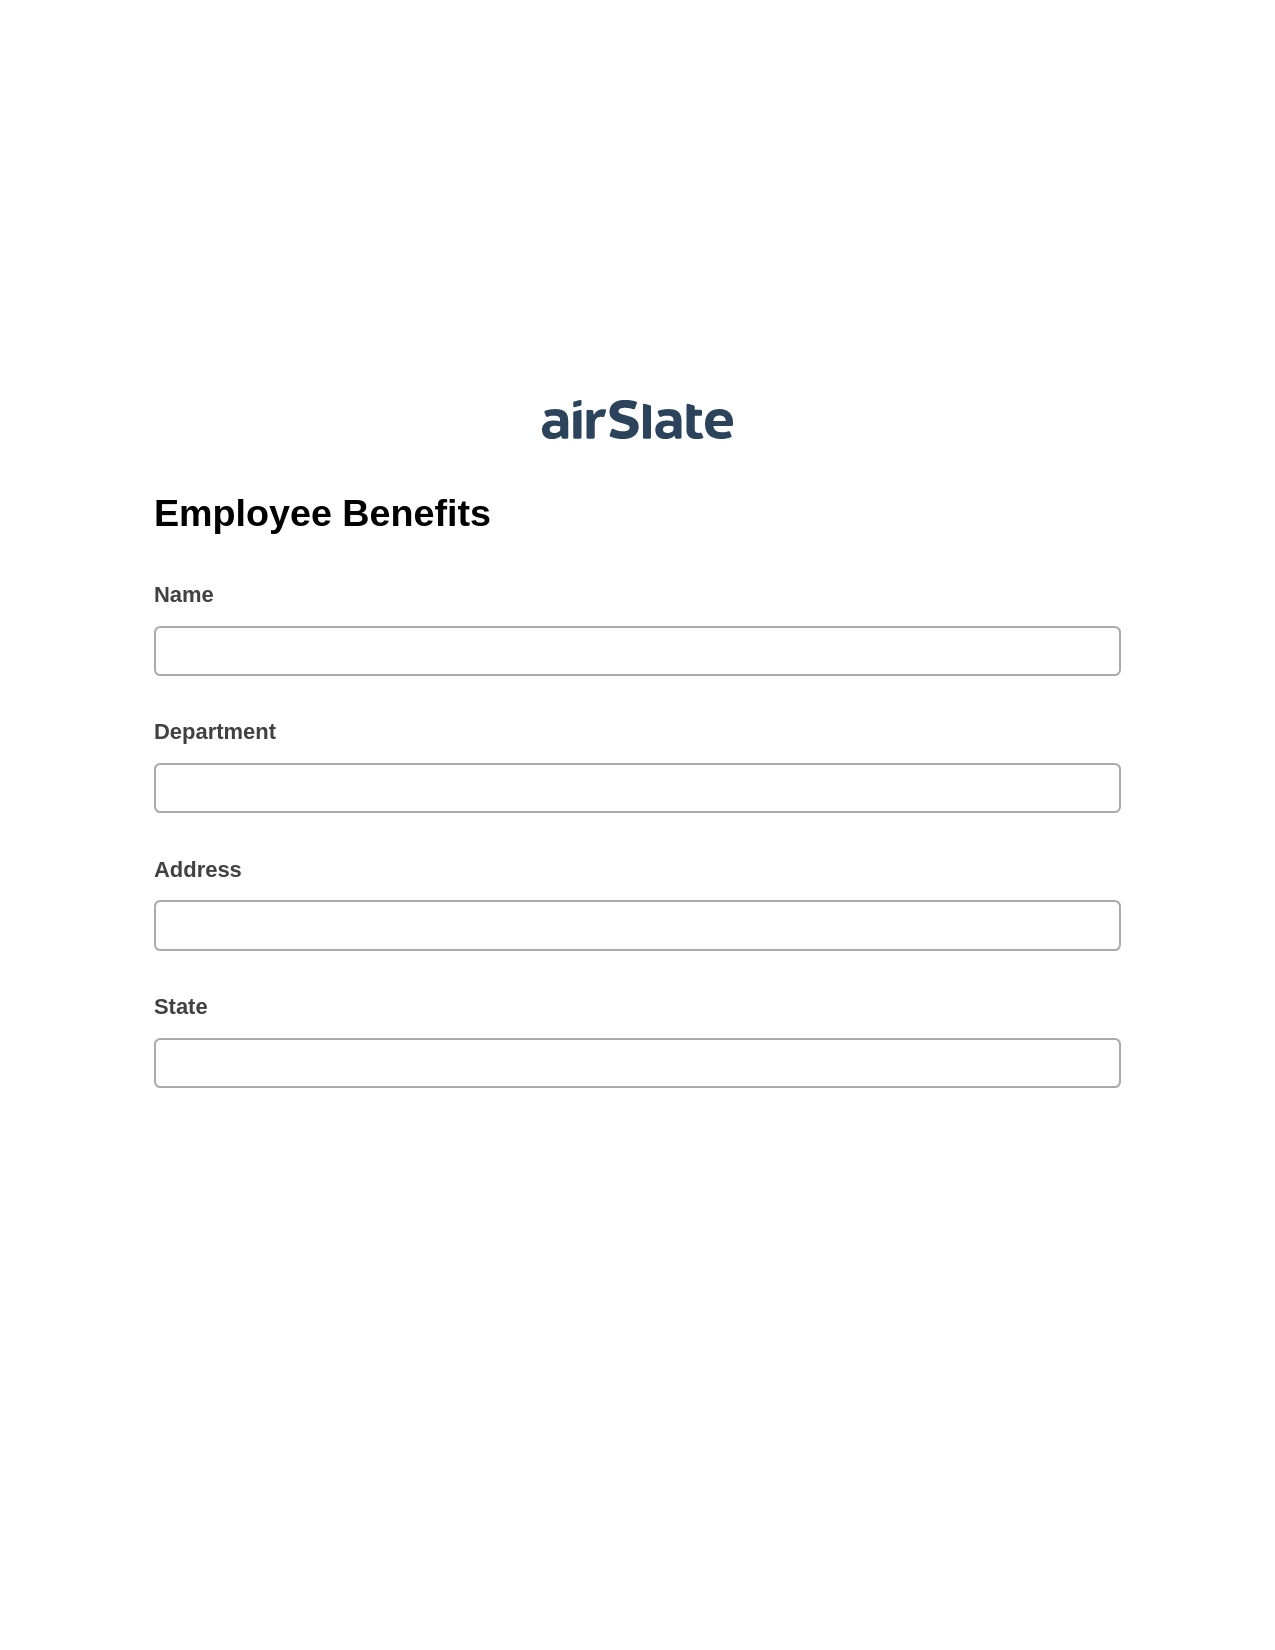 Employee Benefits Pre-fill from CSV File Bot, Create MS Dynamics 365 Records Bot, Email Notification Postfinish Bot